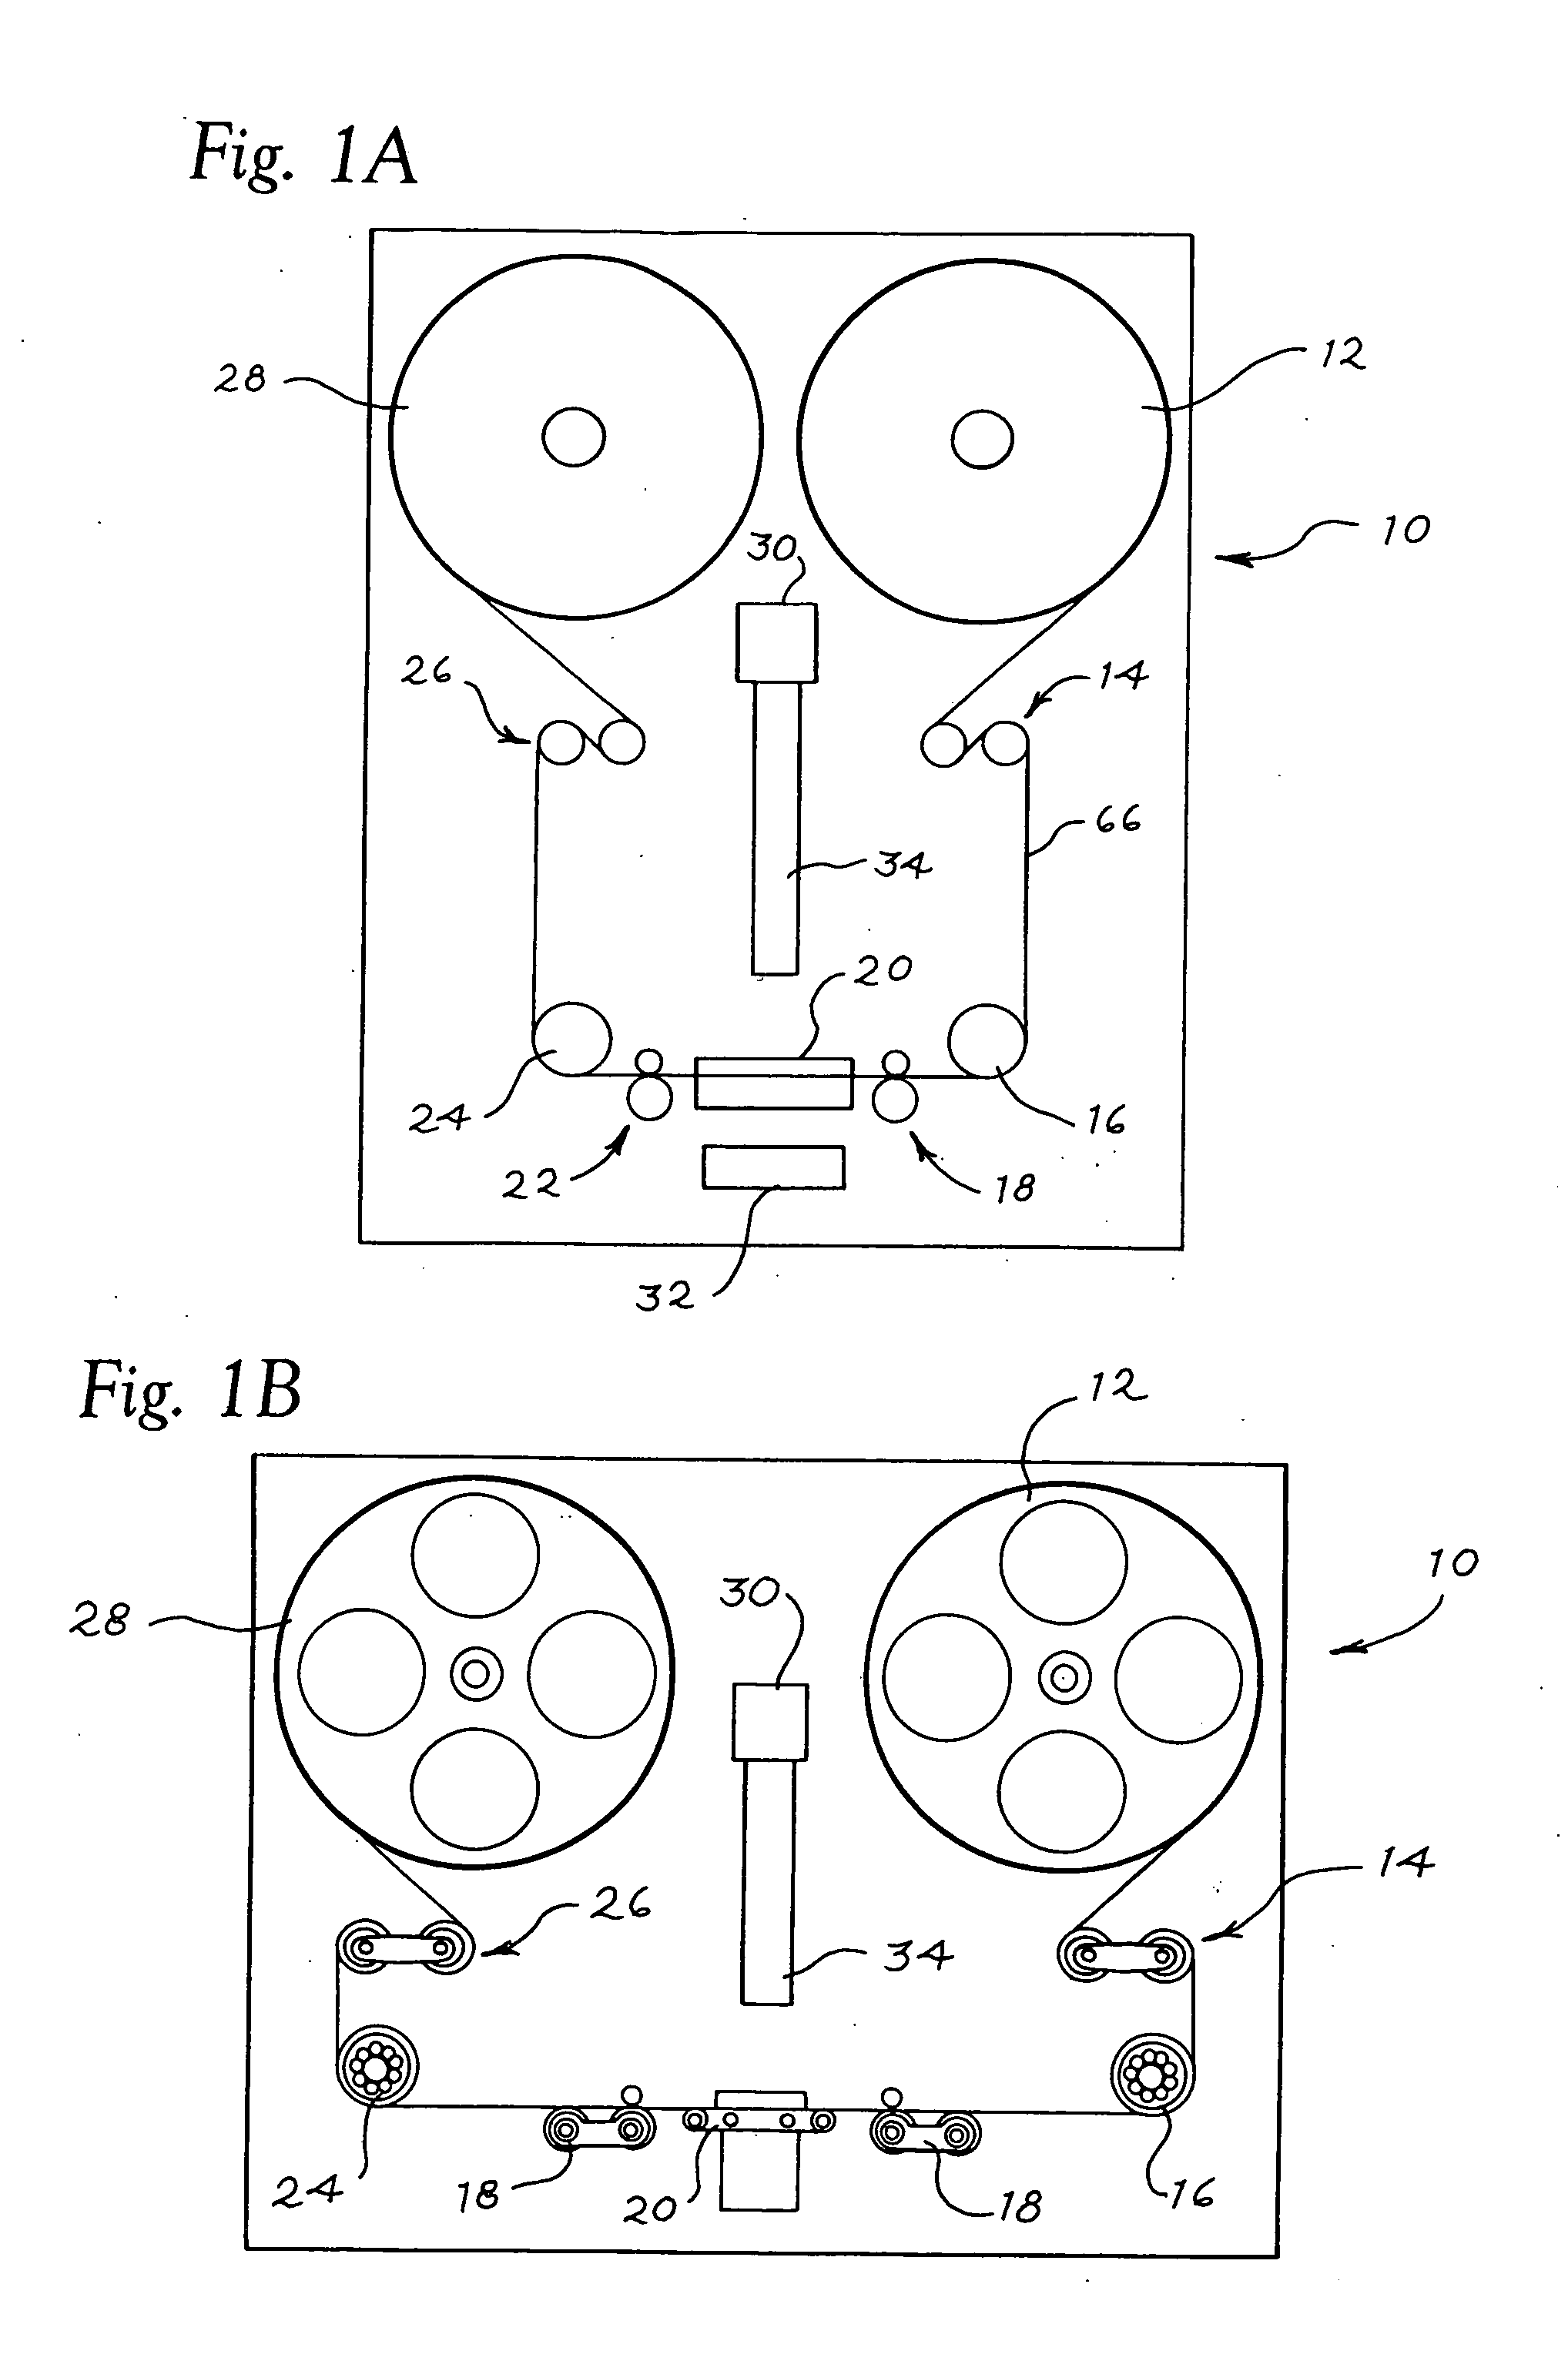 Method and apparatus for continuous motion film scanning